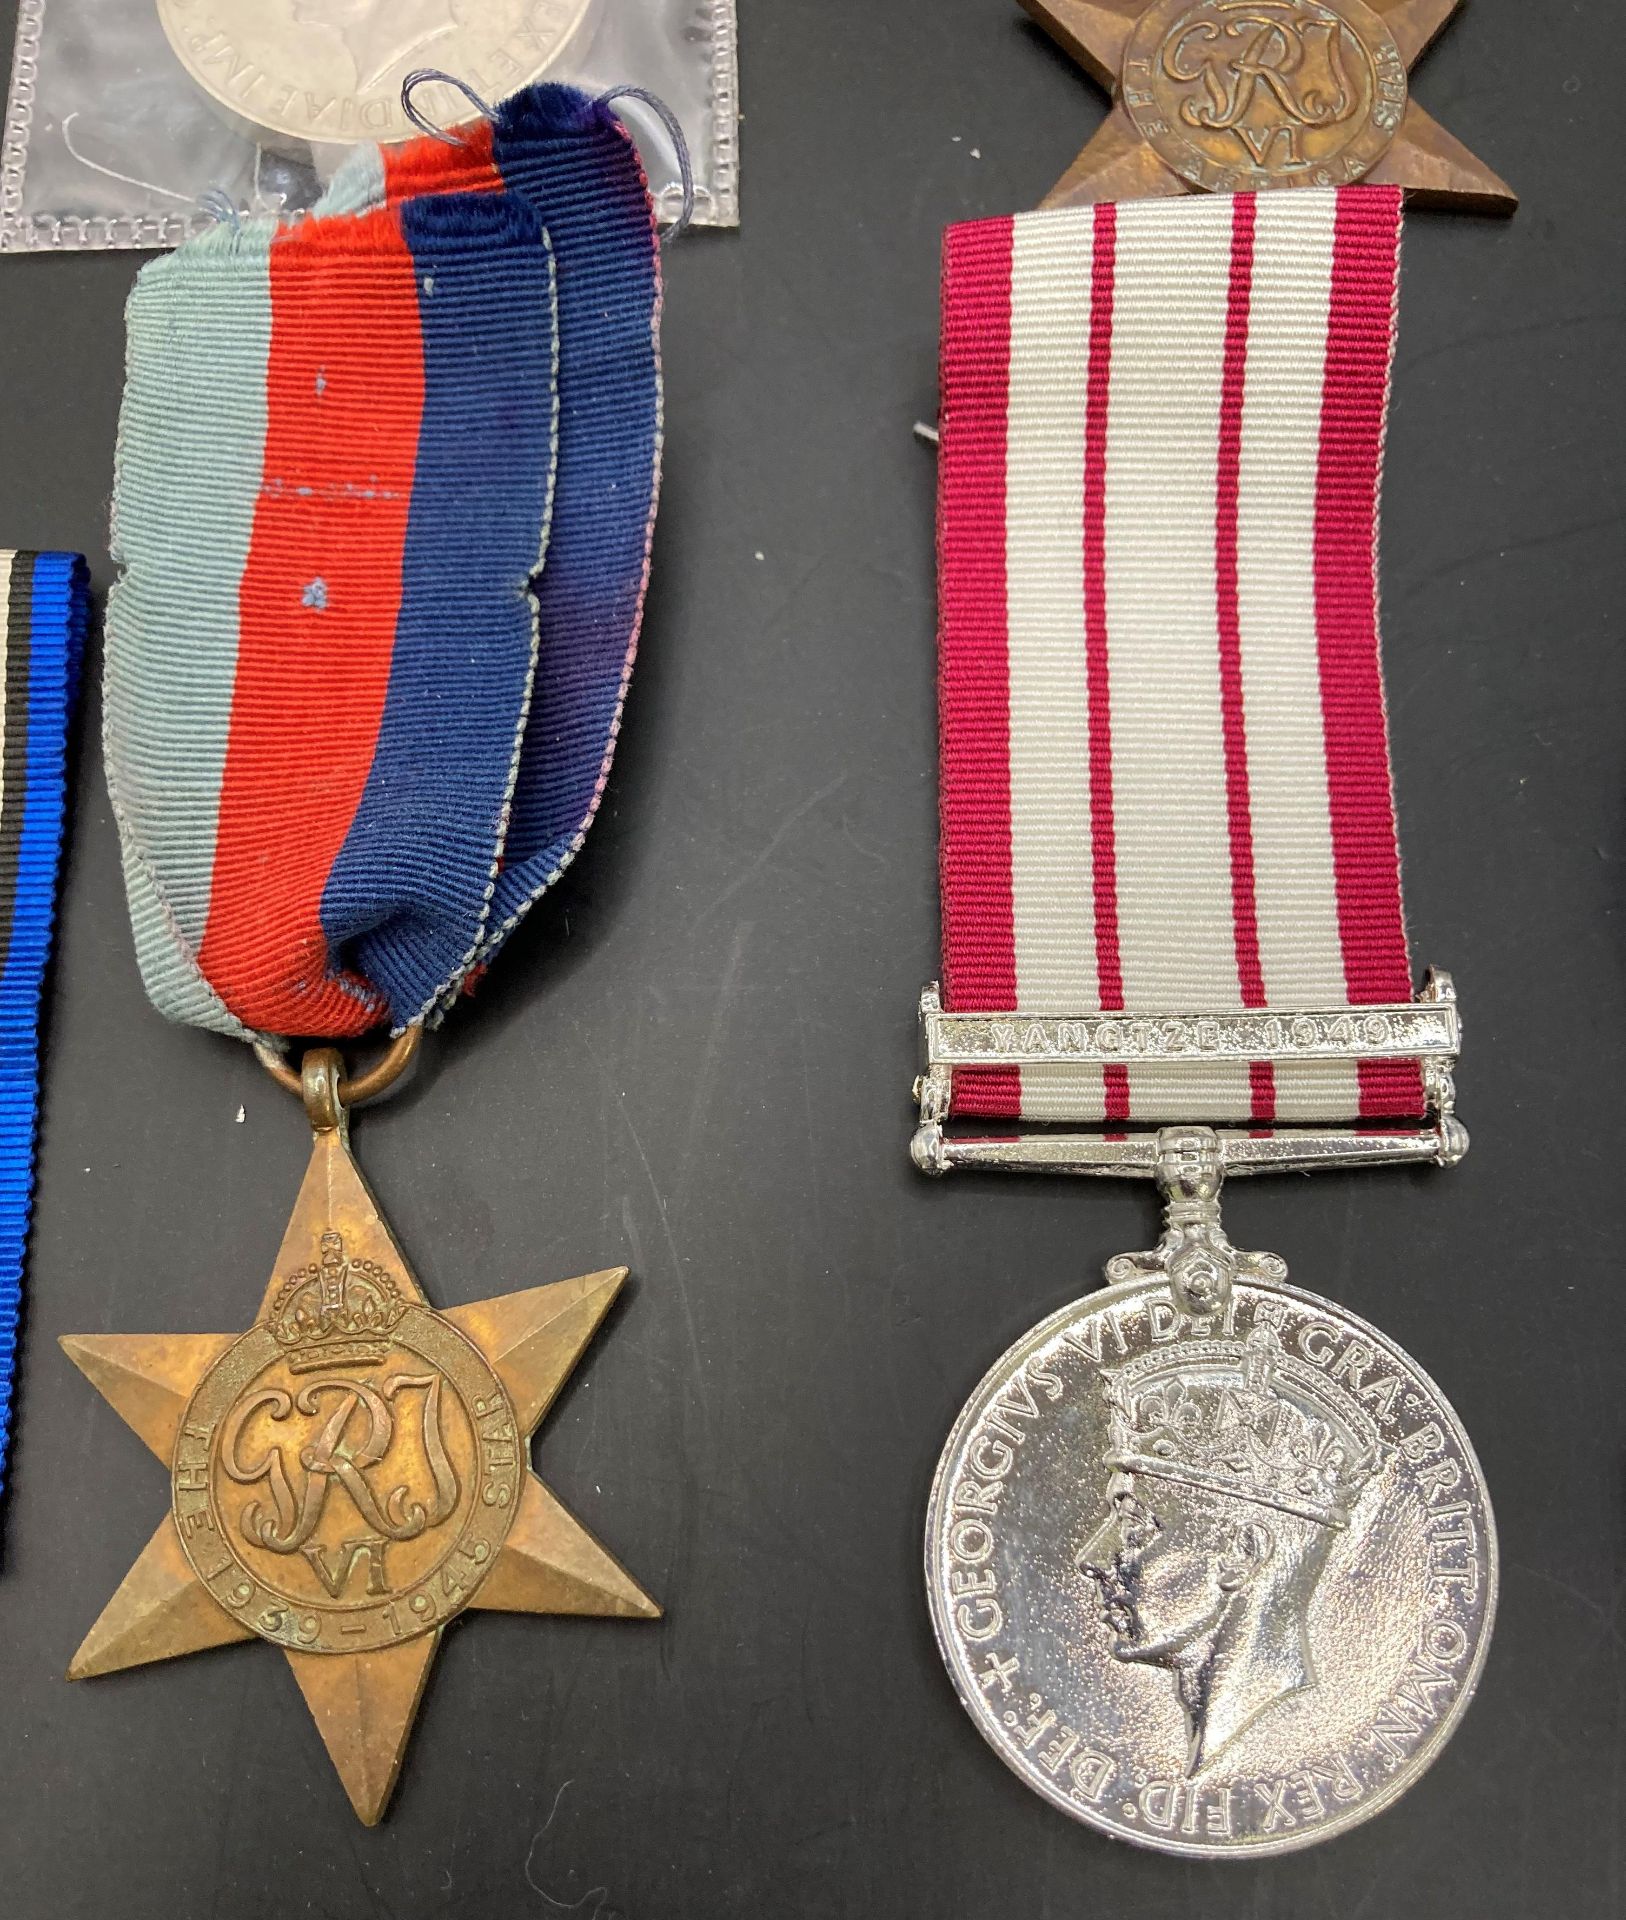 Six Second World War Medals - the 1939-1945 Star with ribbon, the Africa Star, two 1939-1945, - Image 4 of 8